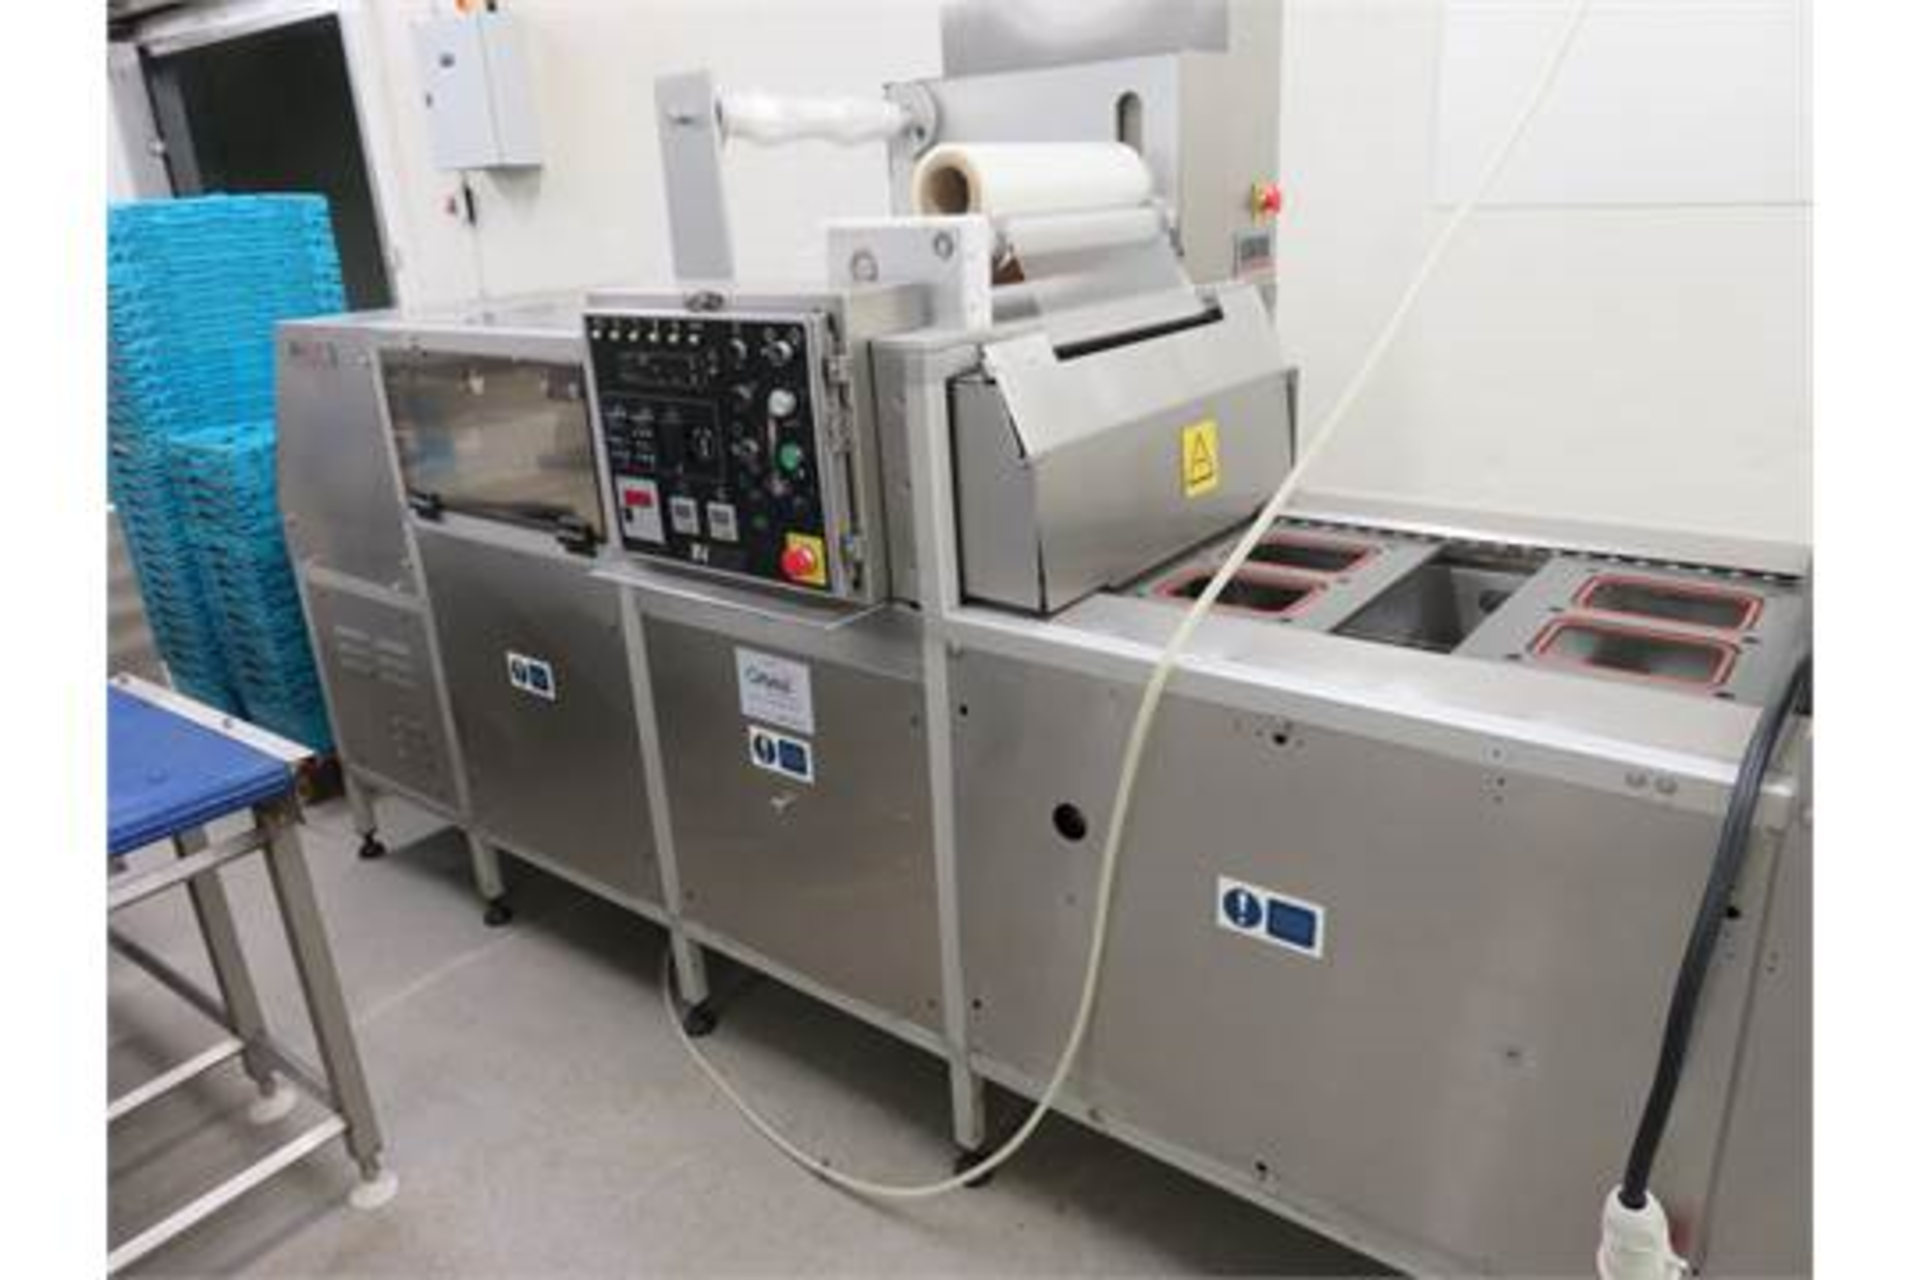 Ross Inpack Junior A20 Automatic Tray Sealer The Inpack Junior A20 is an automatic tray sealer - Image 3 of 5